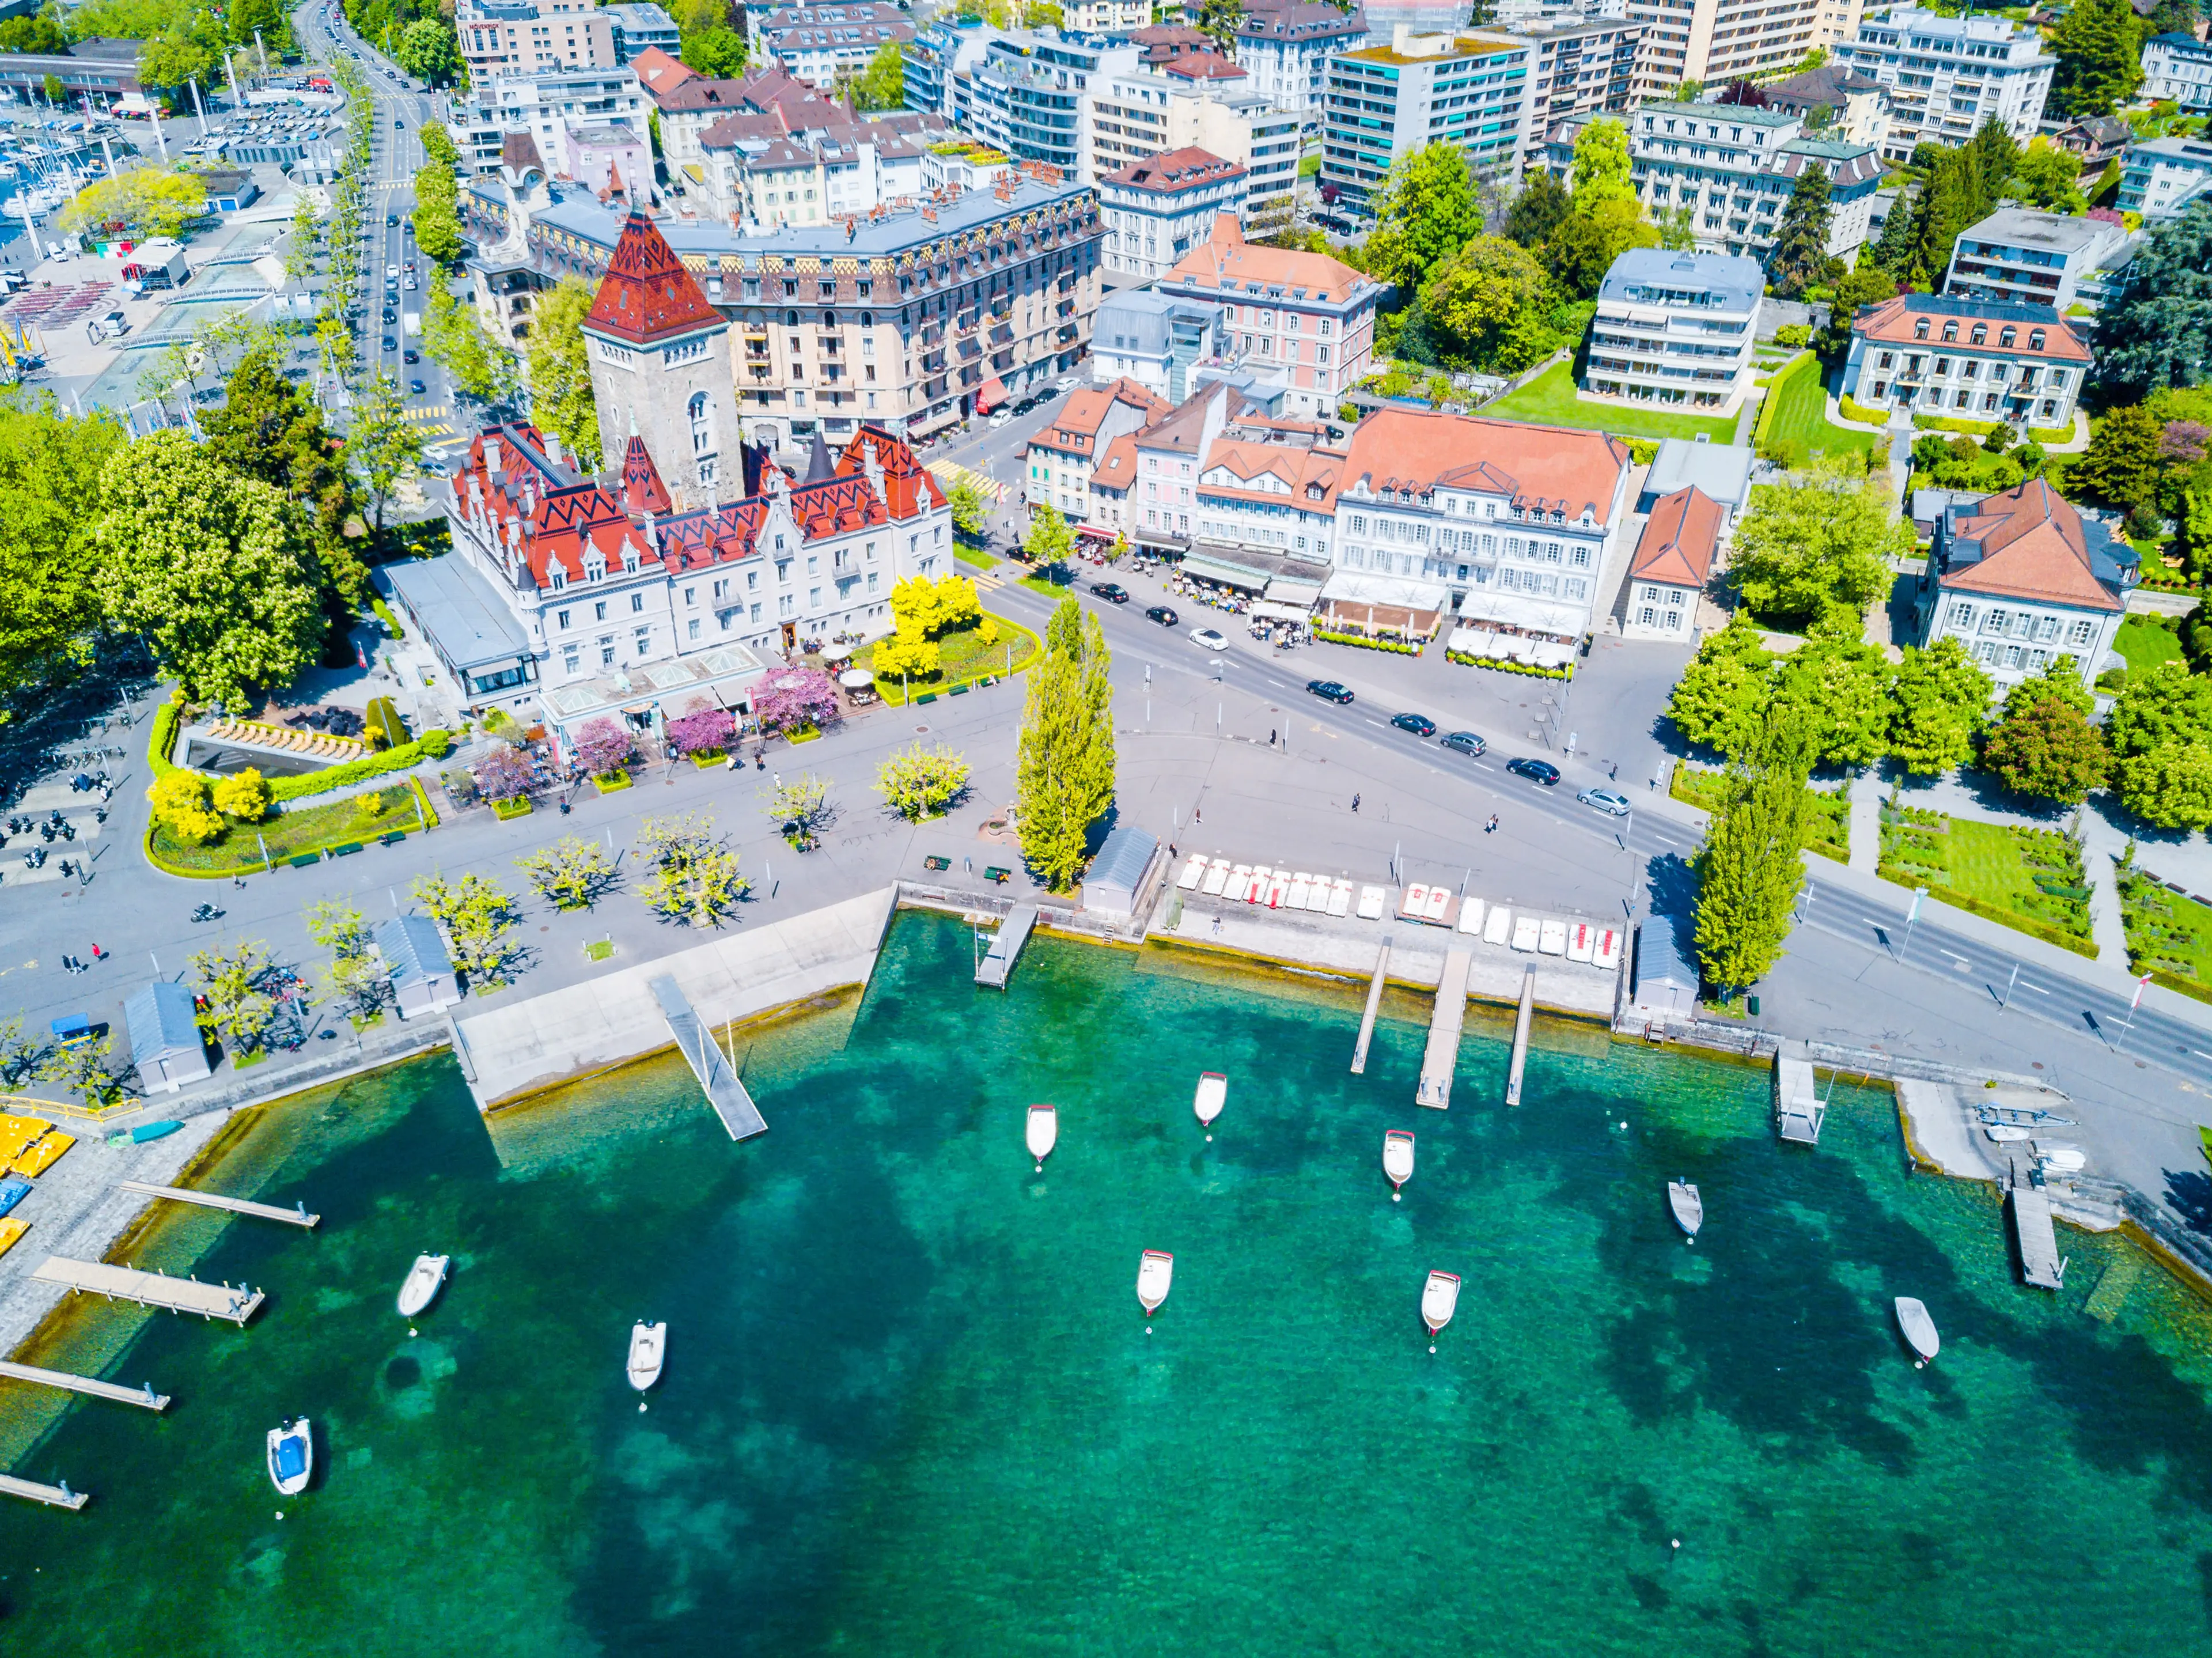 3-Day Romantic Food, Wine & Sightseeing Tour in Lausanne